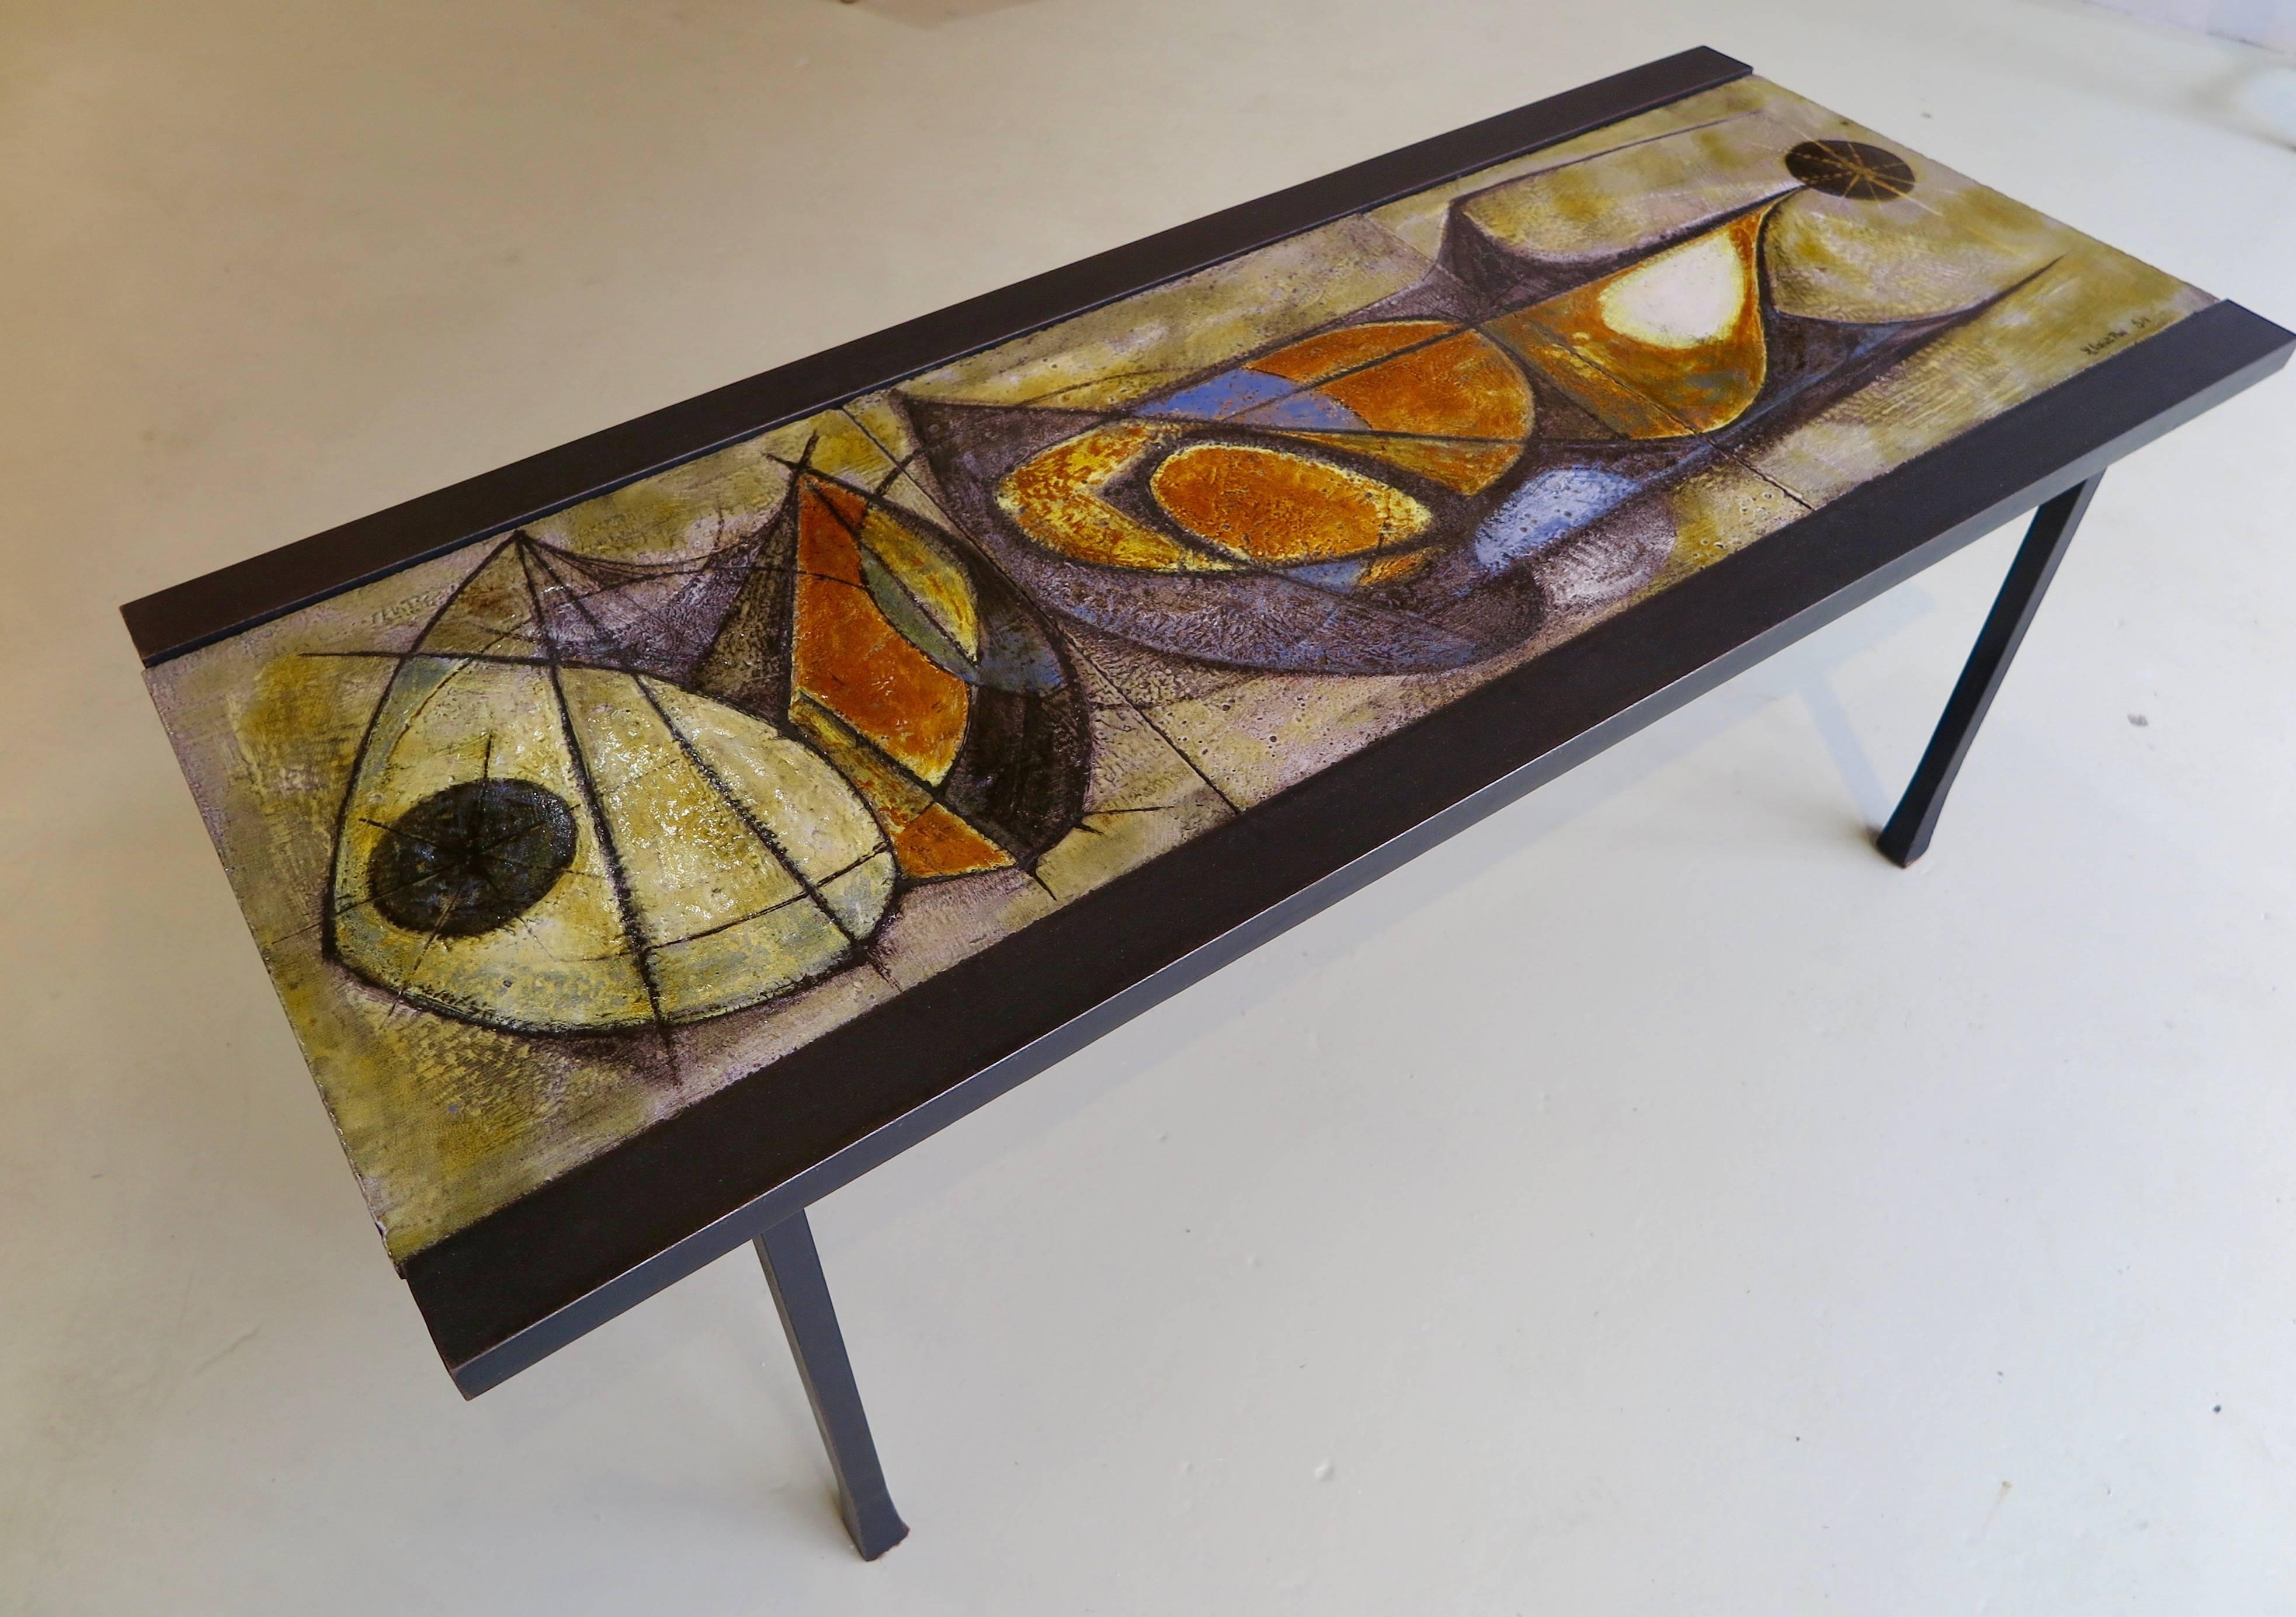 Unique ceramic coffee table with three distinctive painted ceramic tiles sitting on a rectangular iron frame by artist Pierre Saint-Paul, France, circa 1950.
Pierre Saint-Paul (1926) worked in South of France where he met Pablo Picasso, Salvador